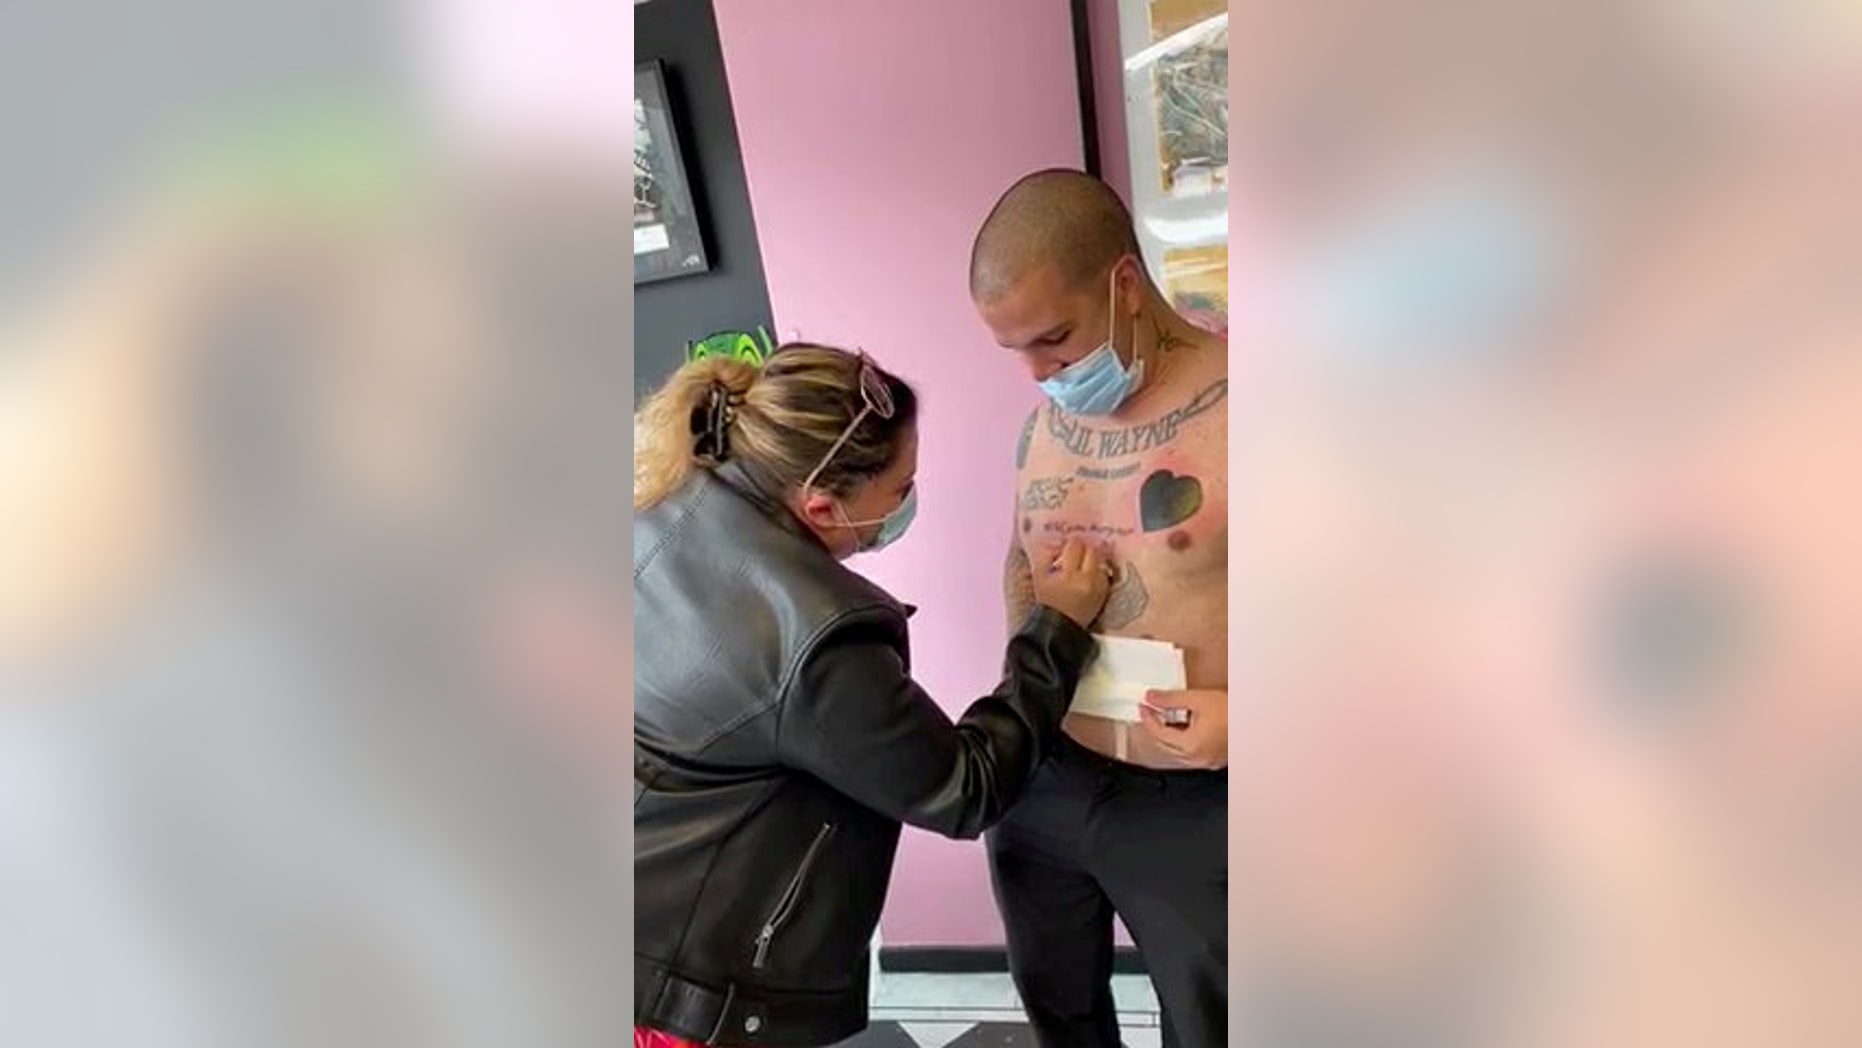 Bruno Neves. from Great Yarmouth, U.K., popped the question to his girlfriend Patricia Calado with a tattoo that read "Will you marry me?" (SWNS)